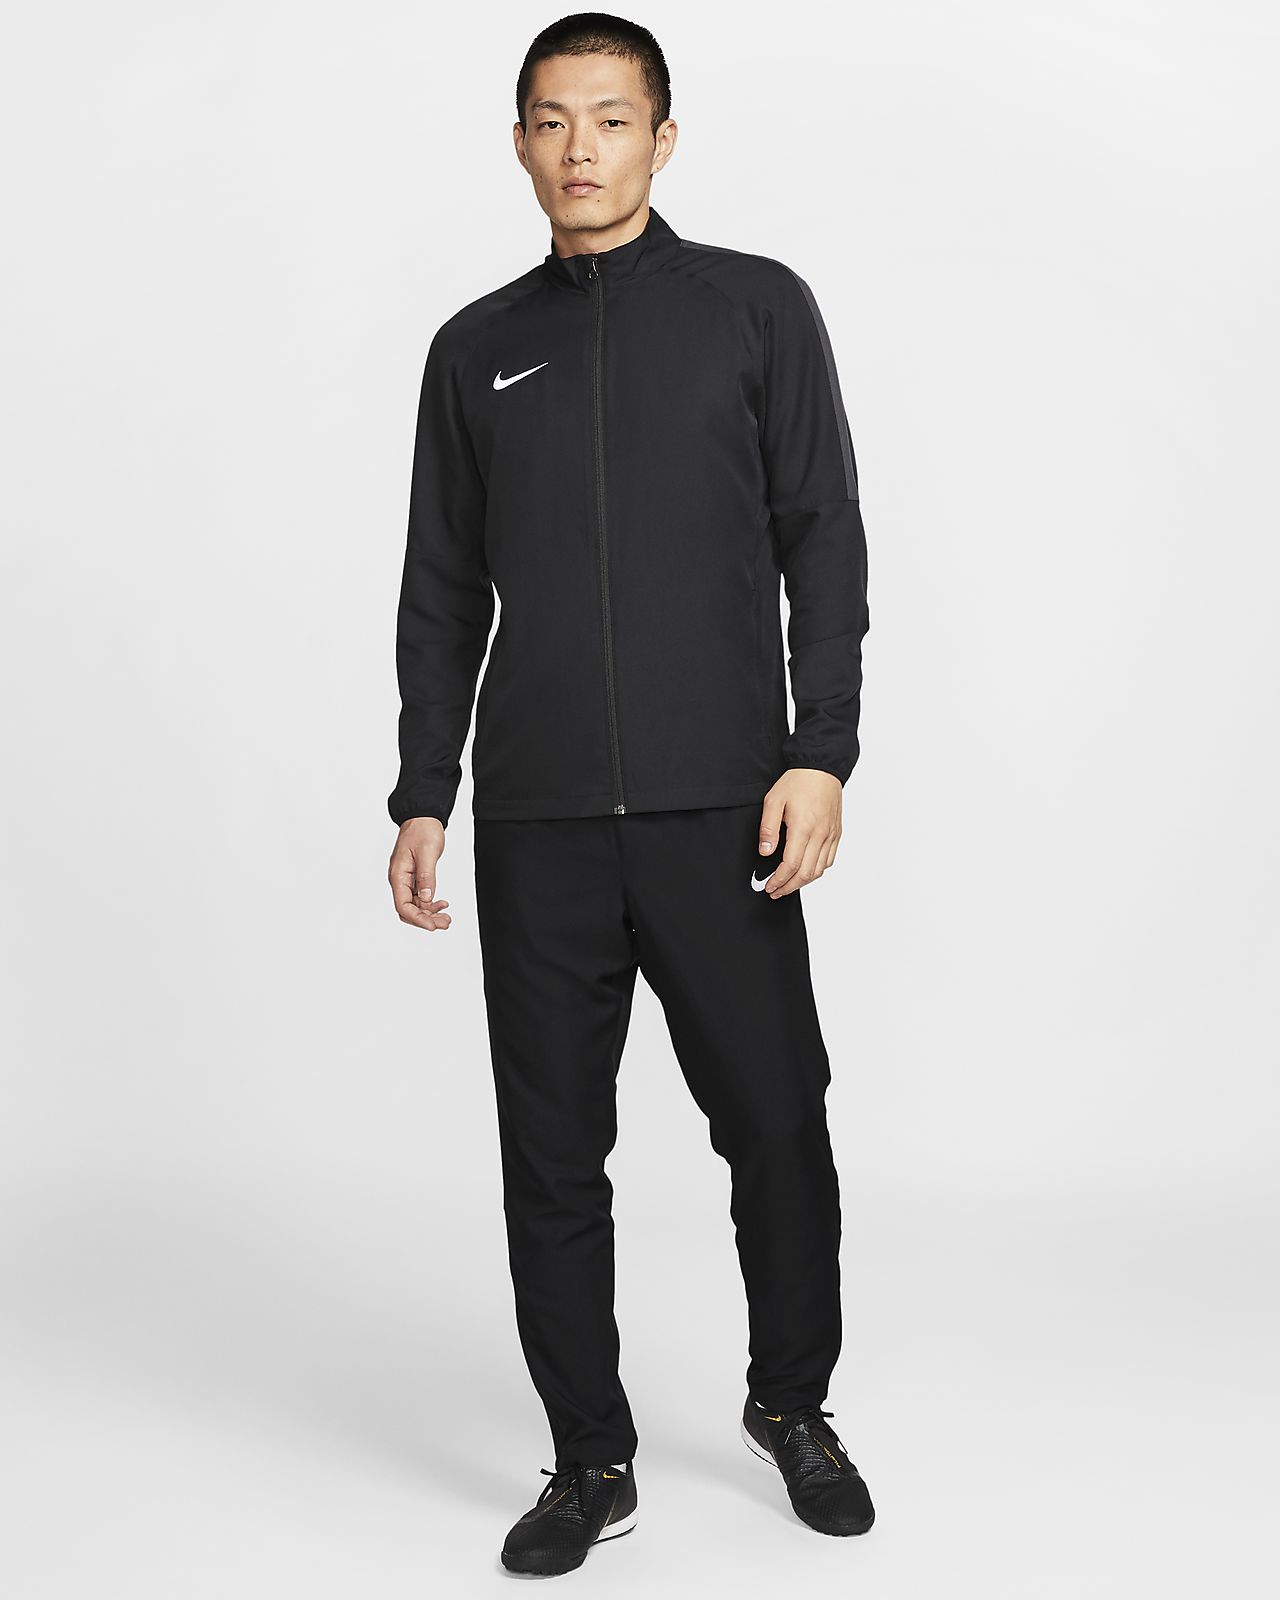 mens academy tracksuit